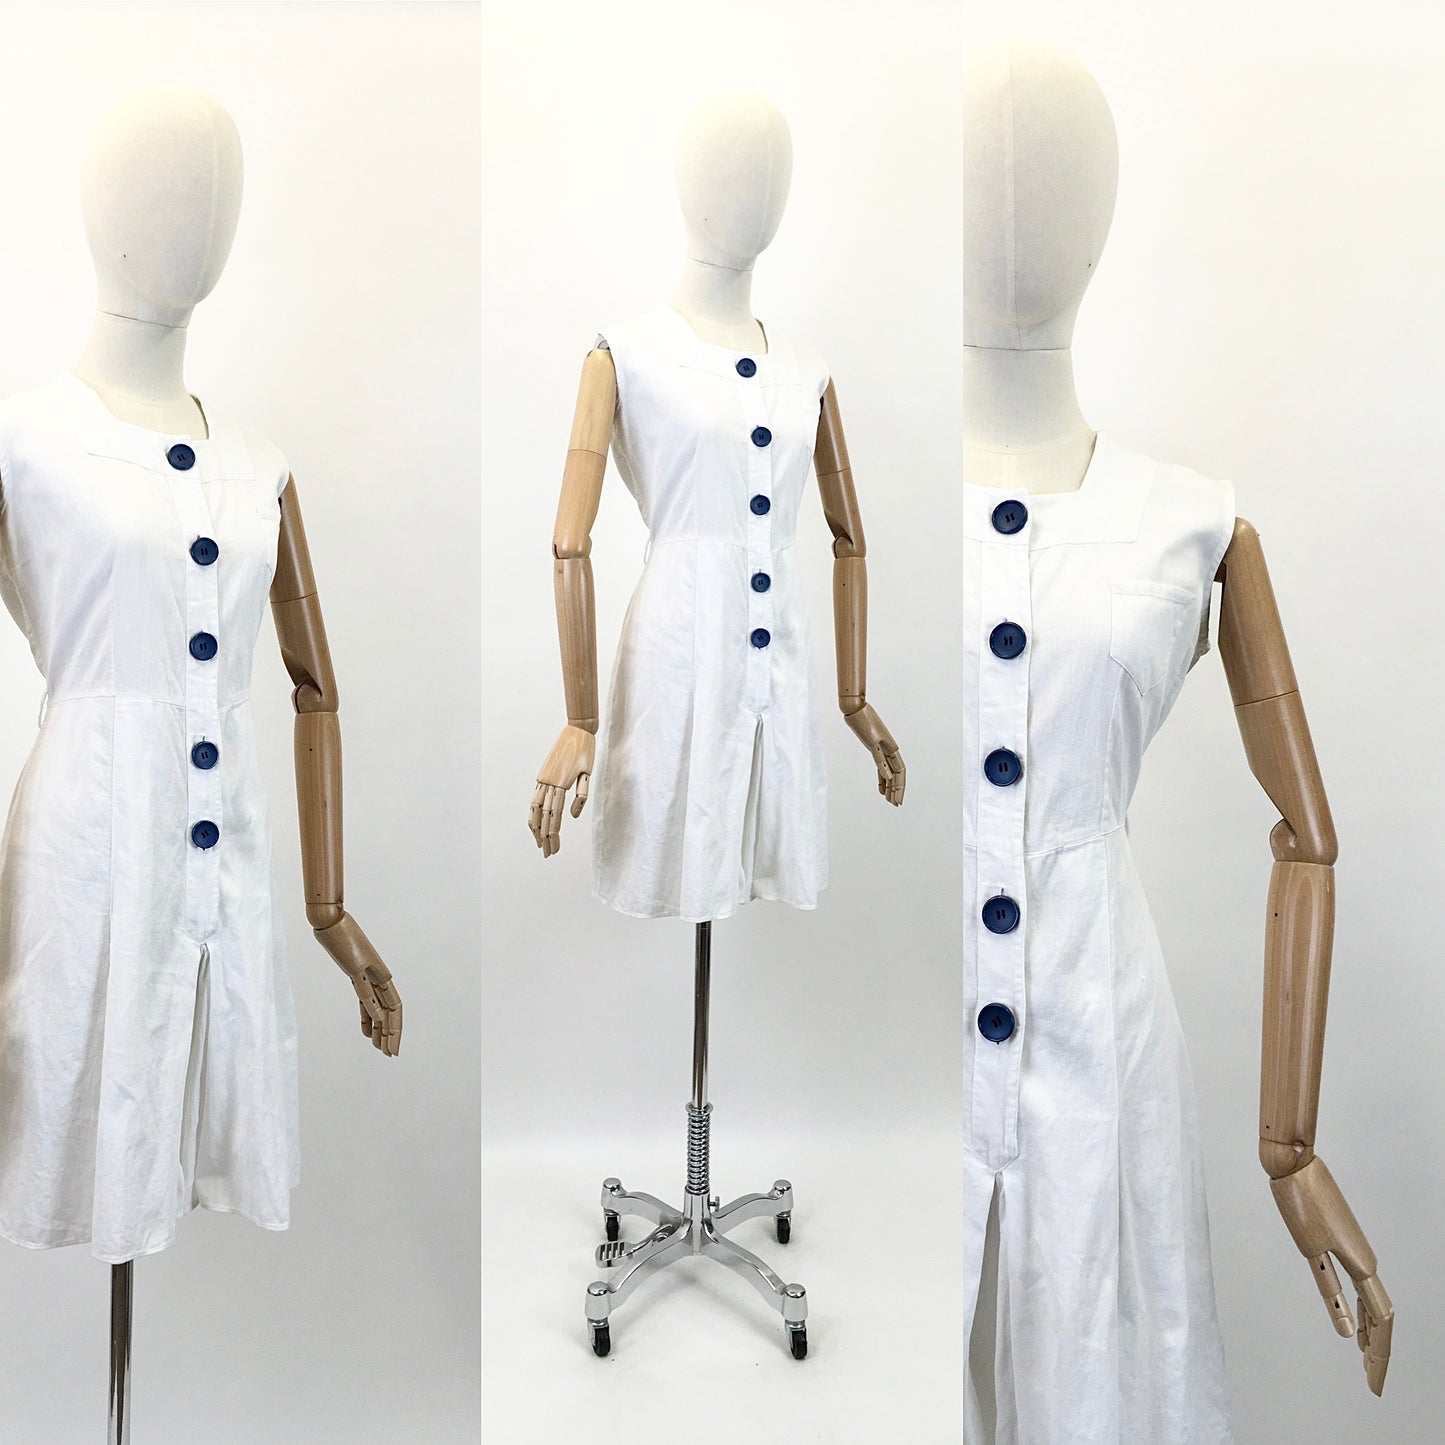 Original 1940's Stunning Off White Sportsuit - With Contrast Blue Buttons